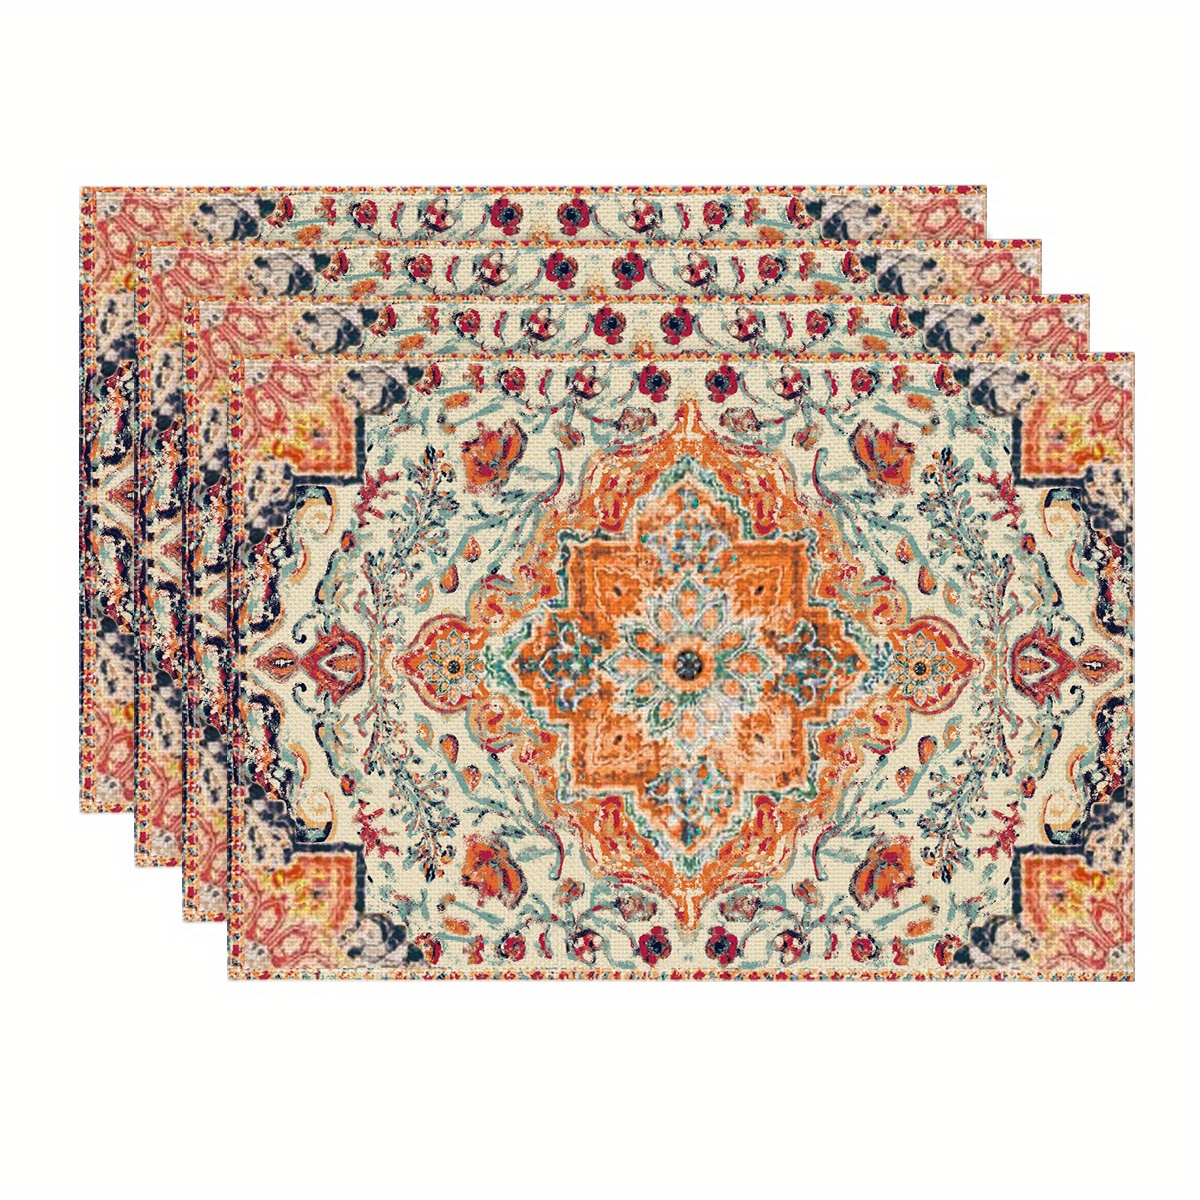 

Sm:)e 4pcs Boho Placemats Set Of 4, Daily Orange Teal Flowes Bohemia Table Mats For Home Party Dining Decoration 12x18 Inch